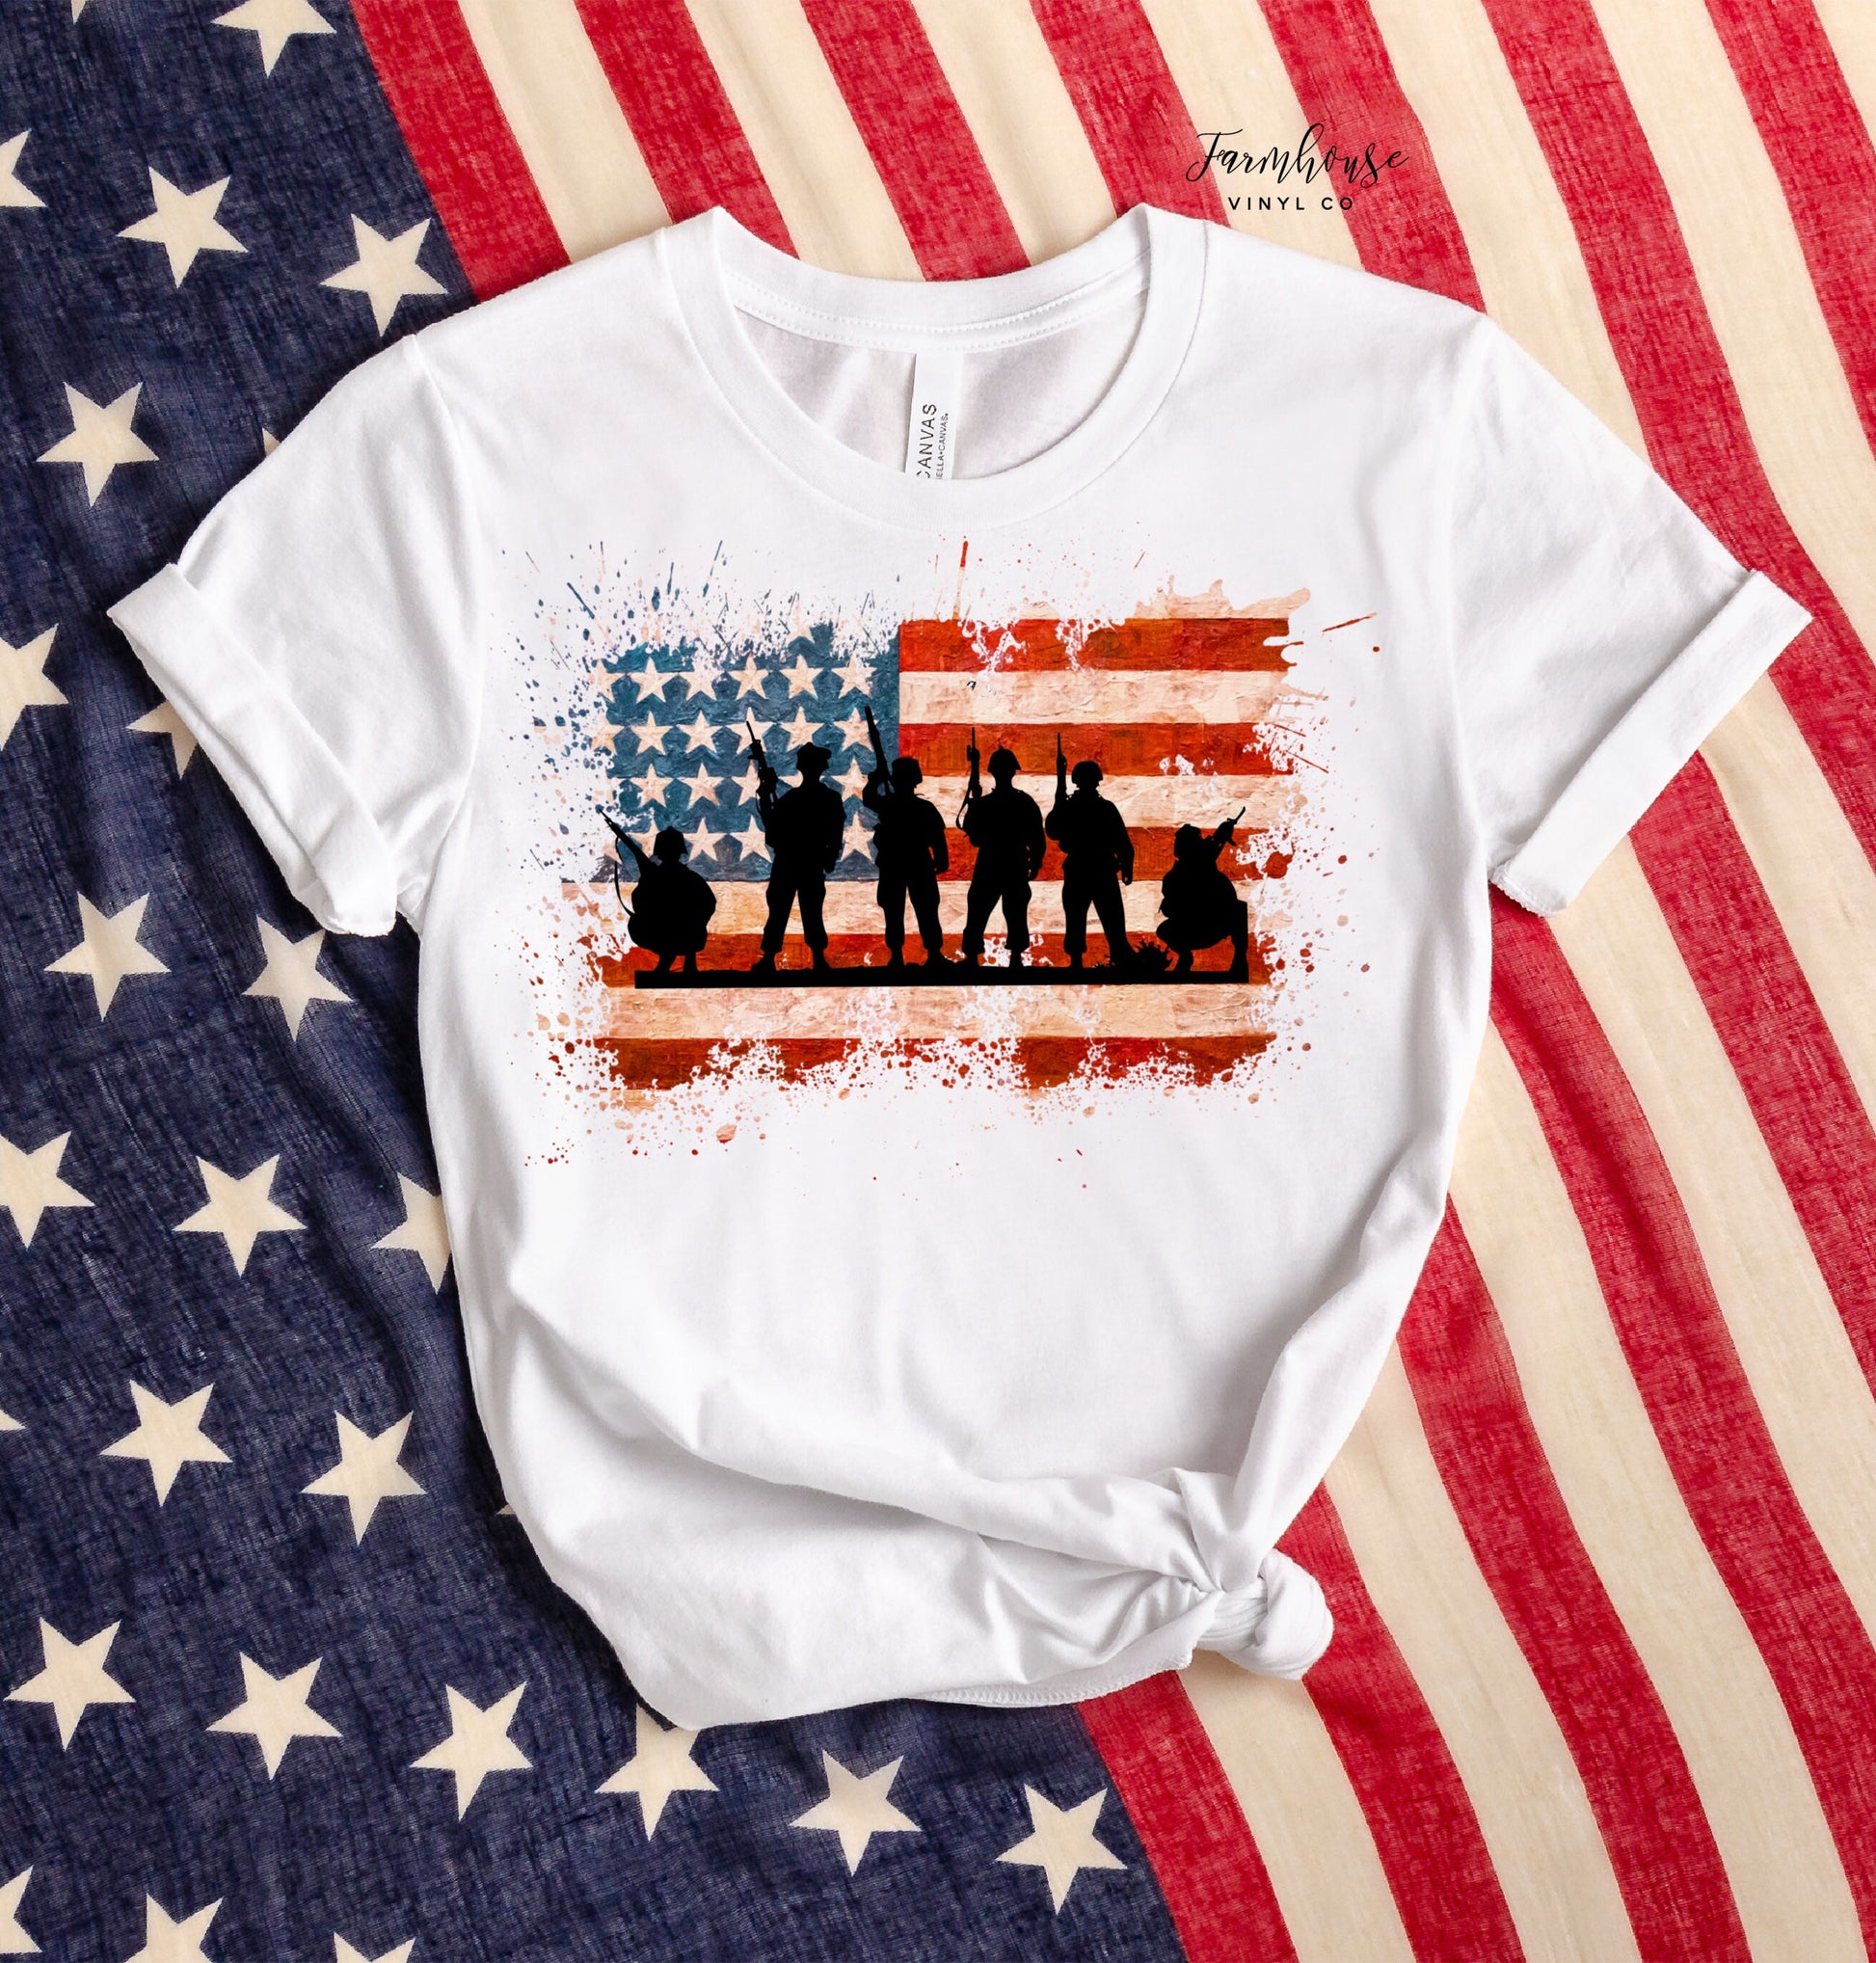 Support Our Troops Military Shirt / American Flag Shirt / Support Our Troops & Veterans / Freedom Shirt / Military Spouse Shirt / Veteran - Farmhouse Vinyl Co